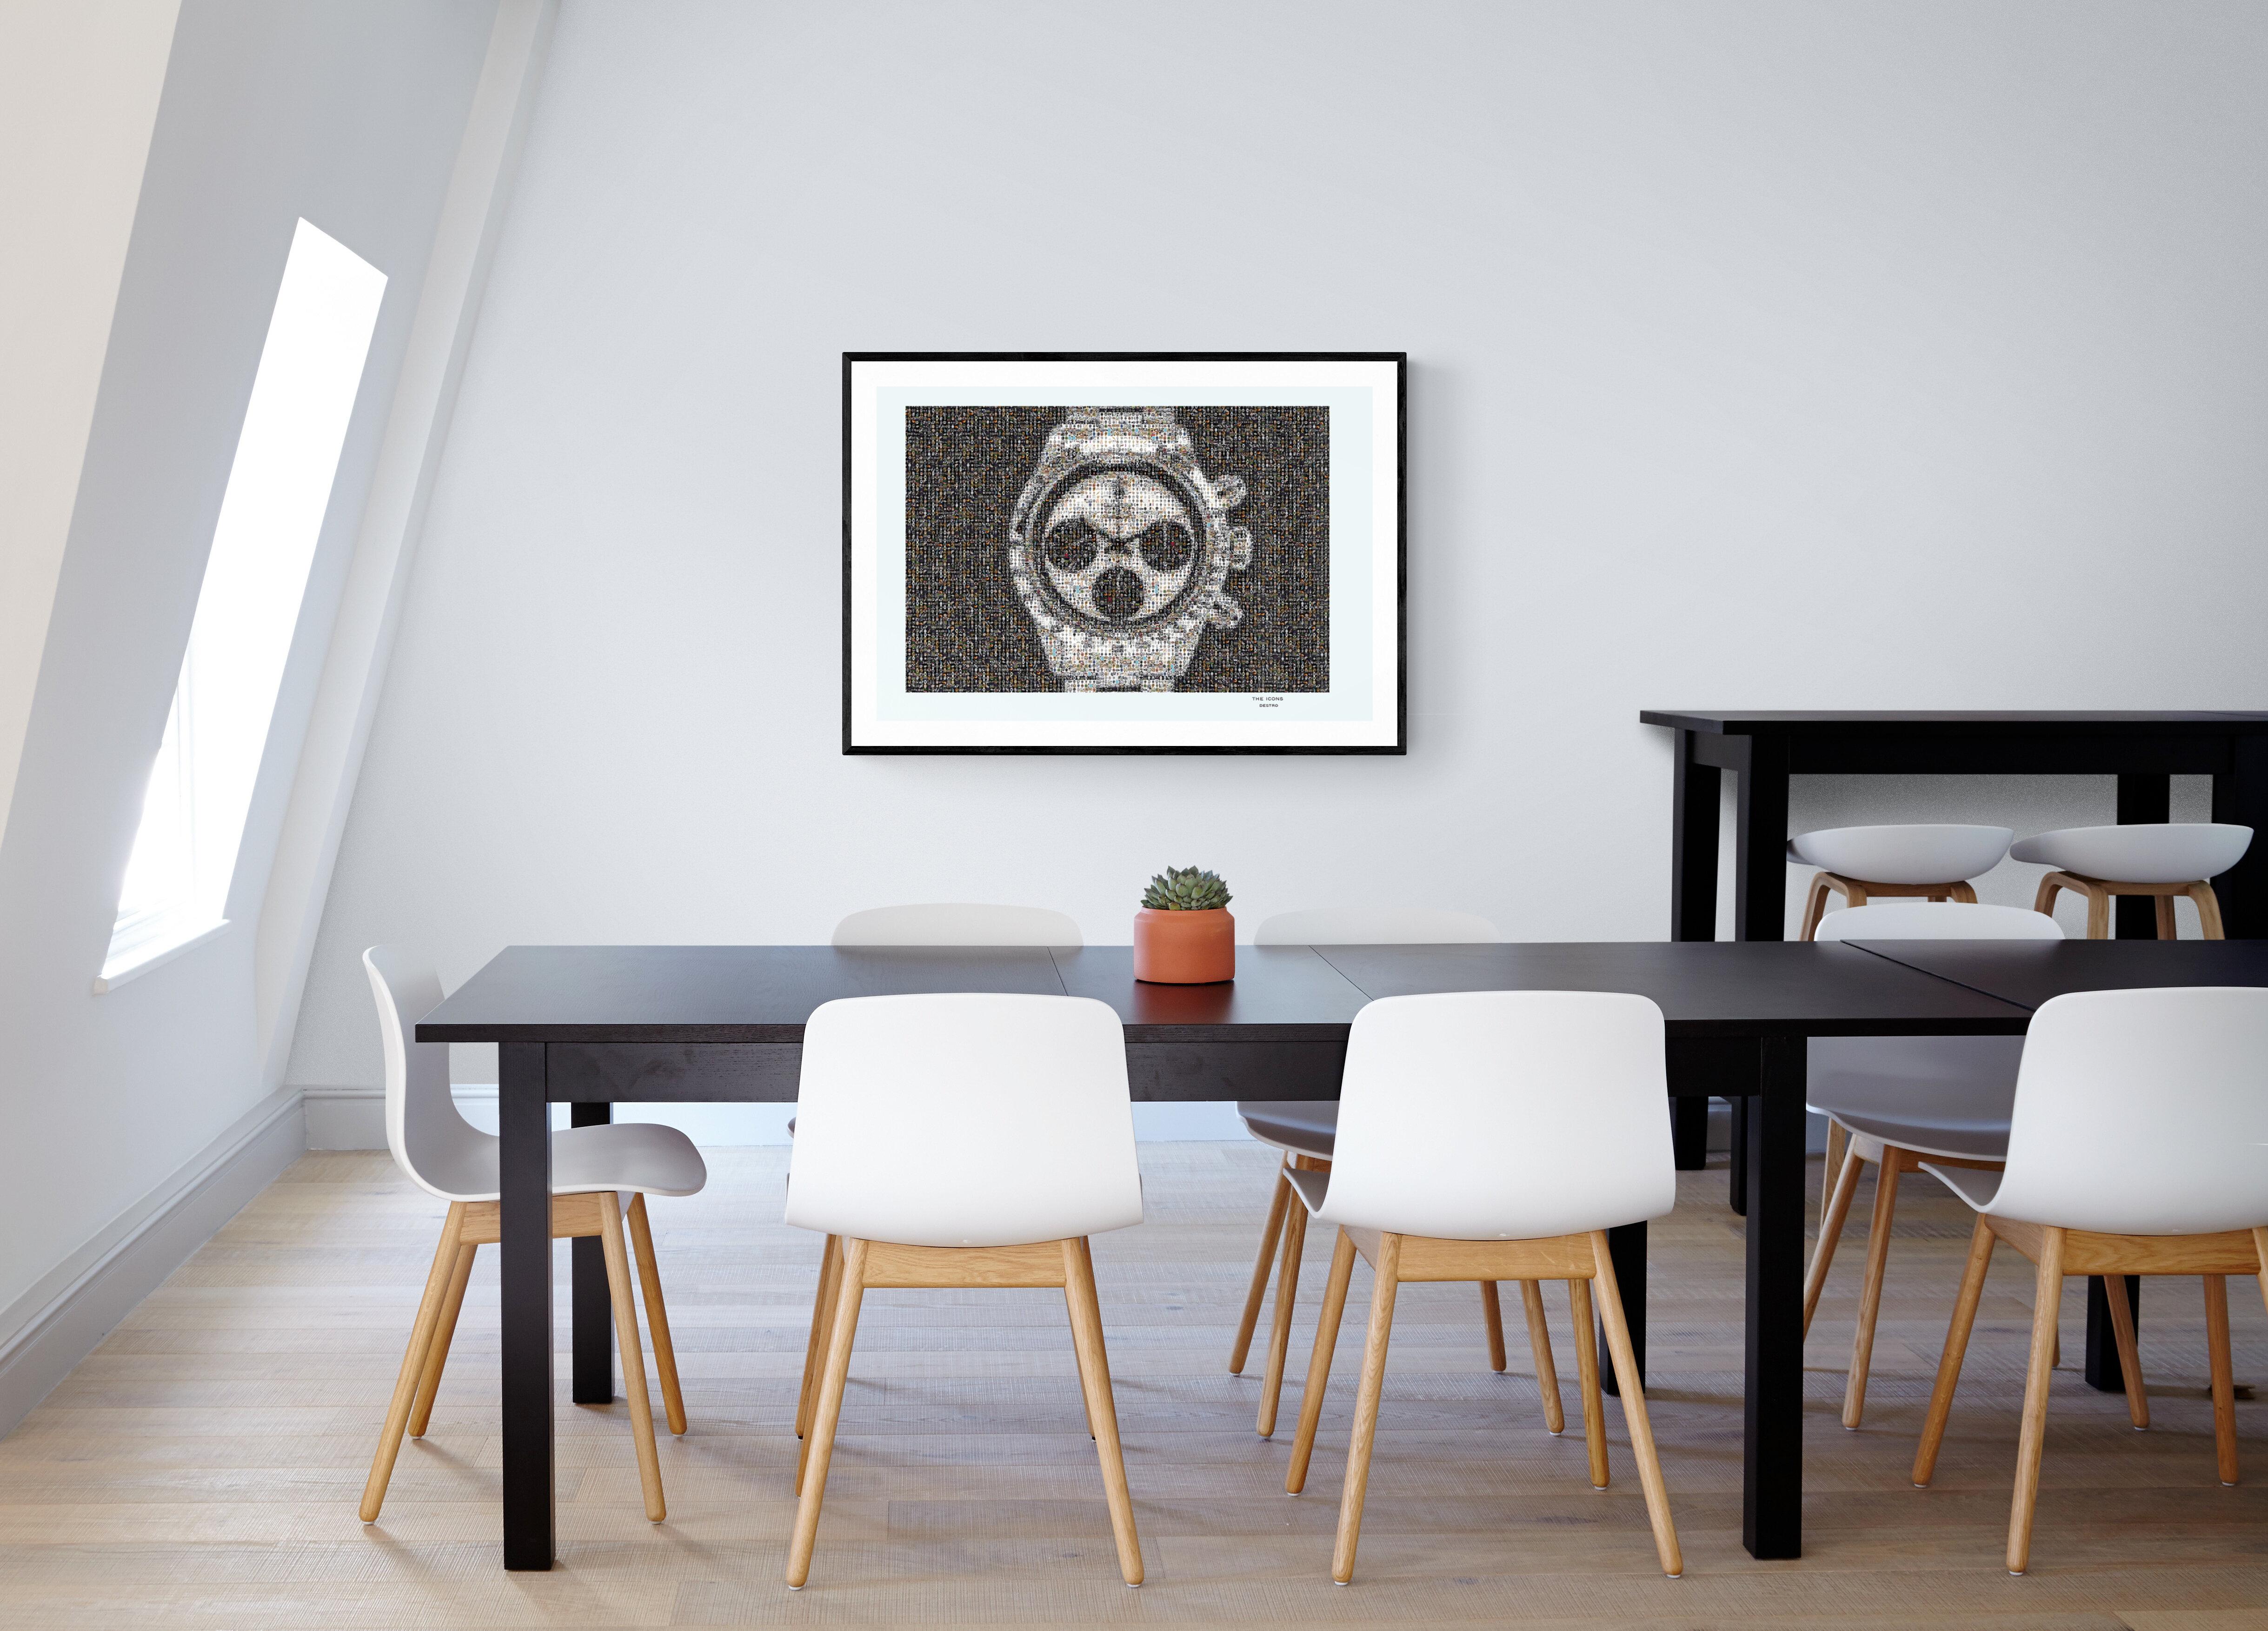 36x48 Exhibition Poster- ROLEX DAYTONA 6263 NEWMAN PHOTOMOSAIC PHOTOGRAPHY  - Gray Color Photograph by Shane Russeck